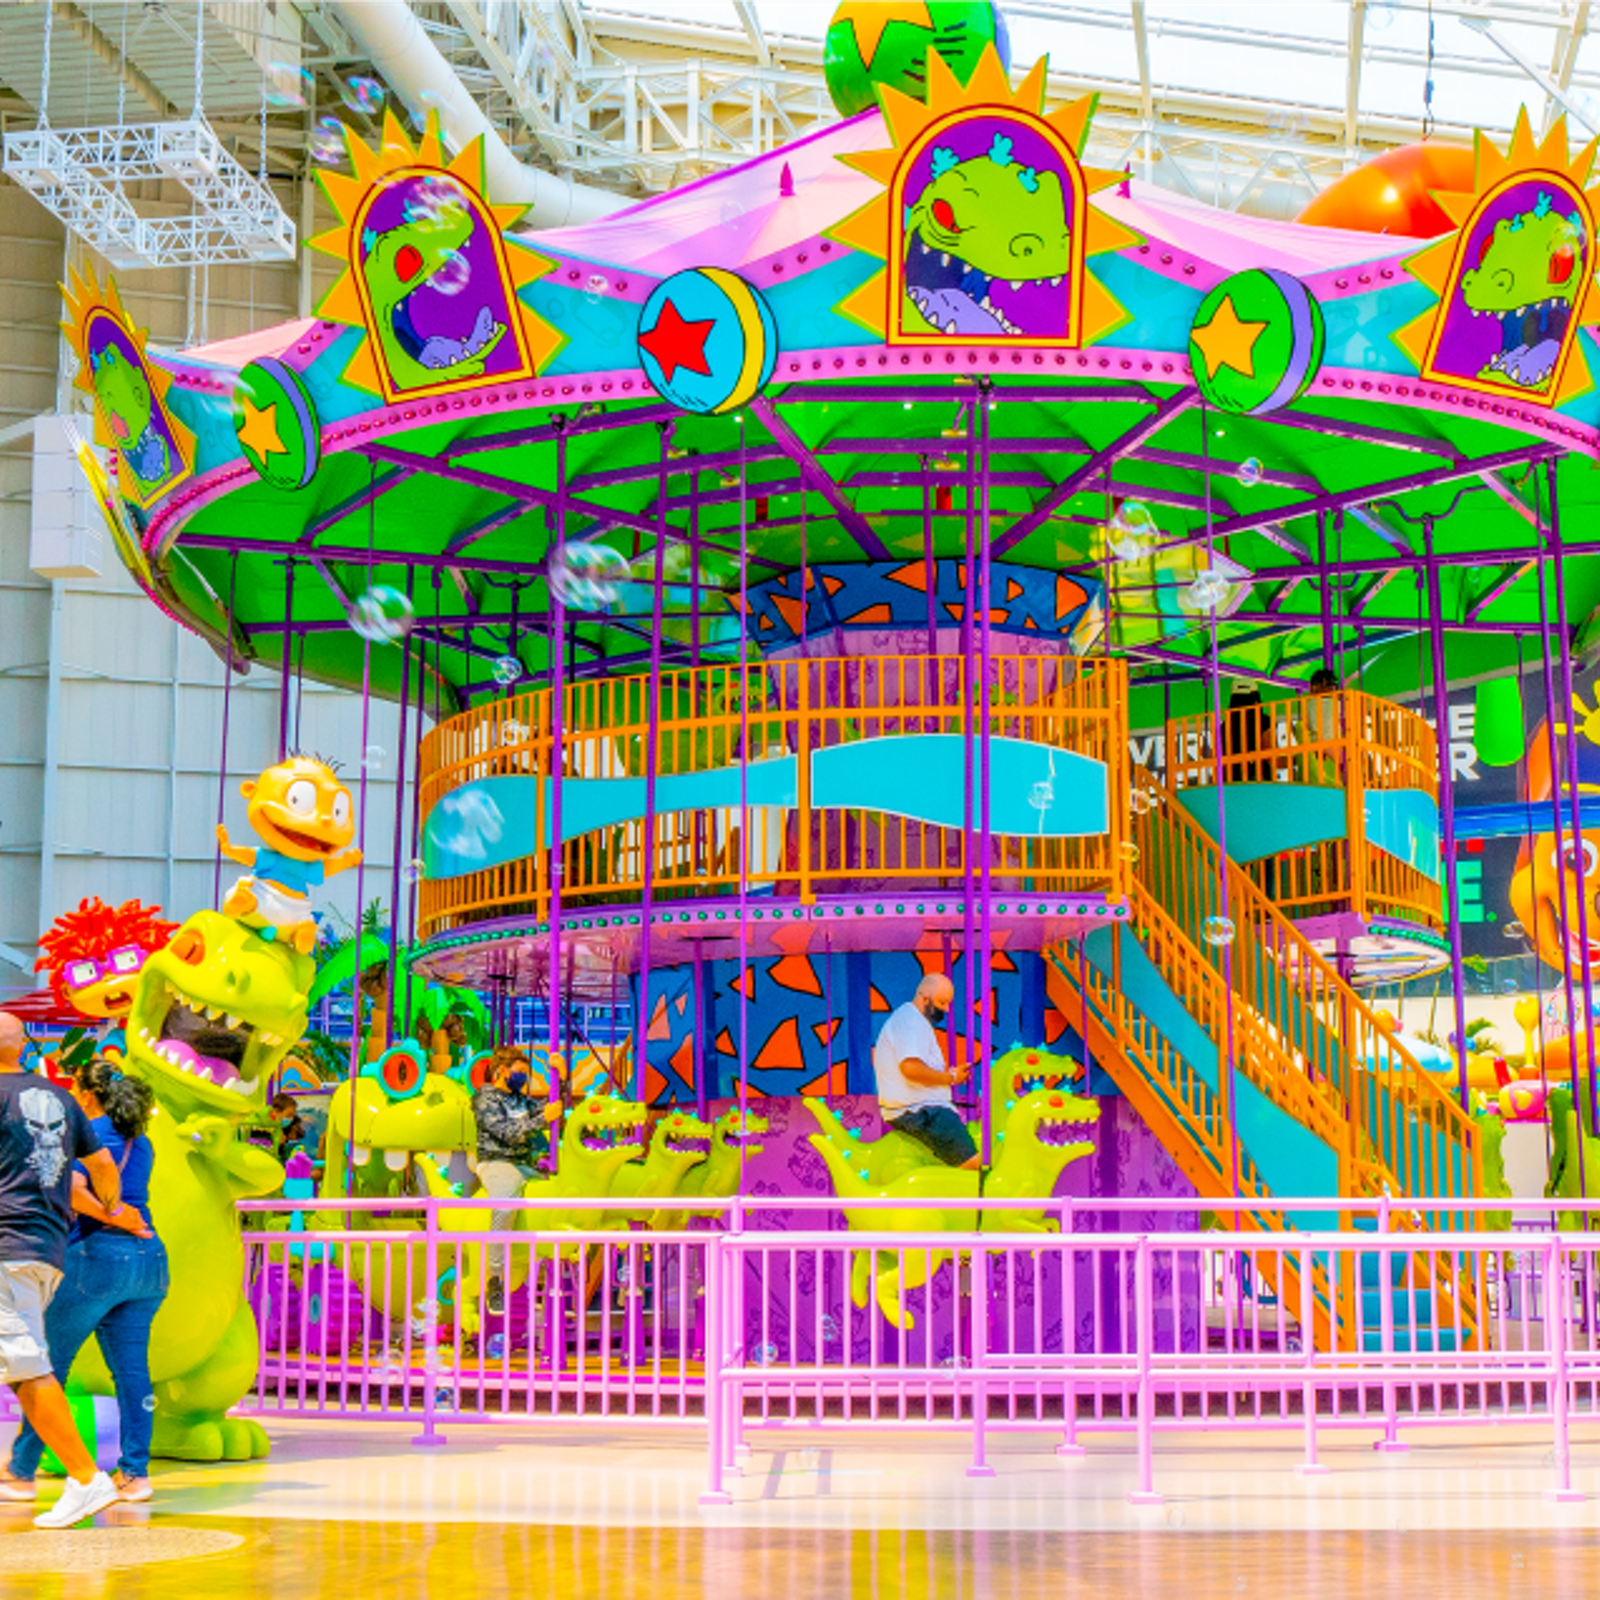 American Dream - Nickelodeon Universe Theme Park in United States